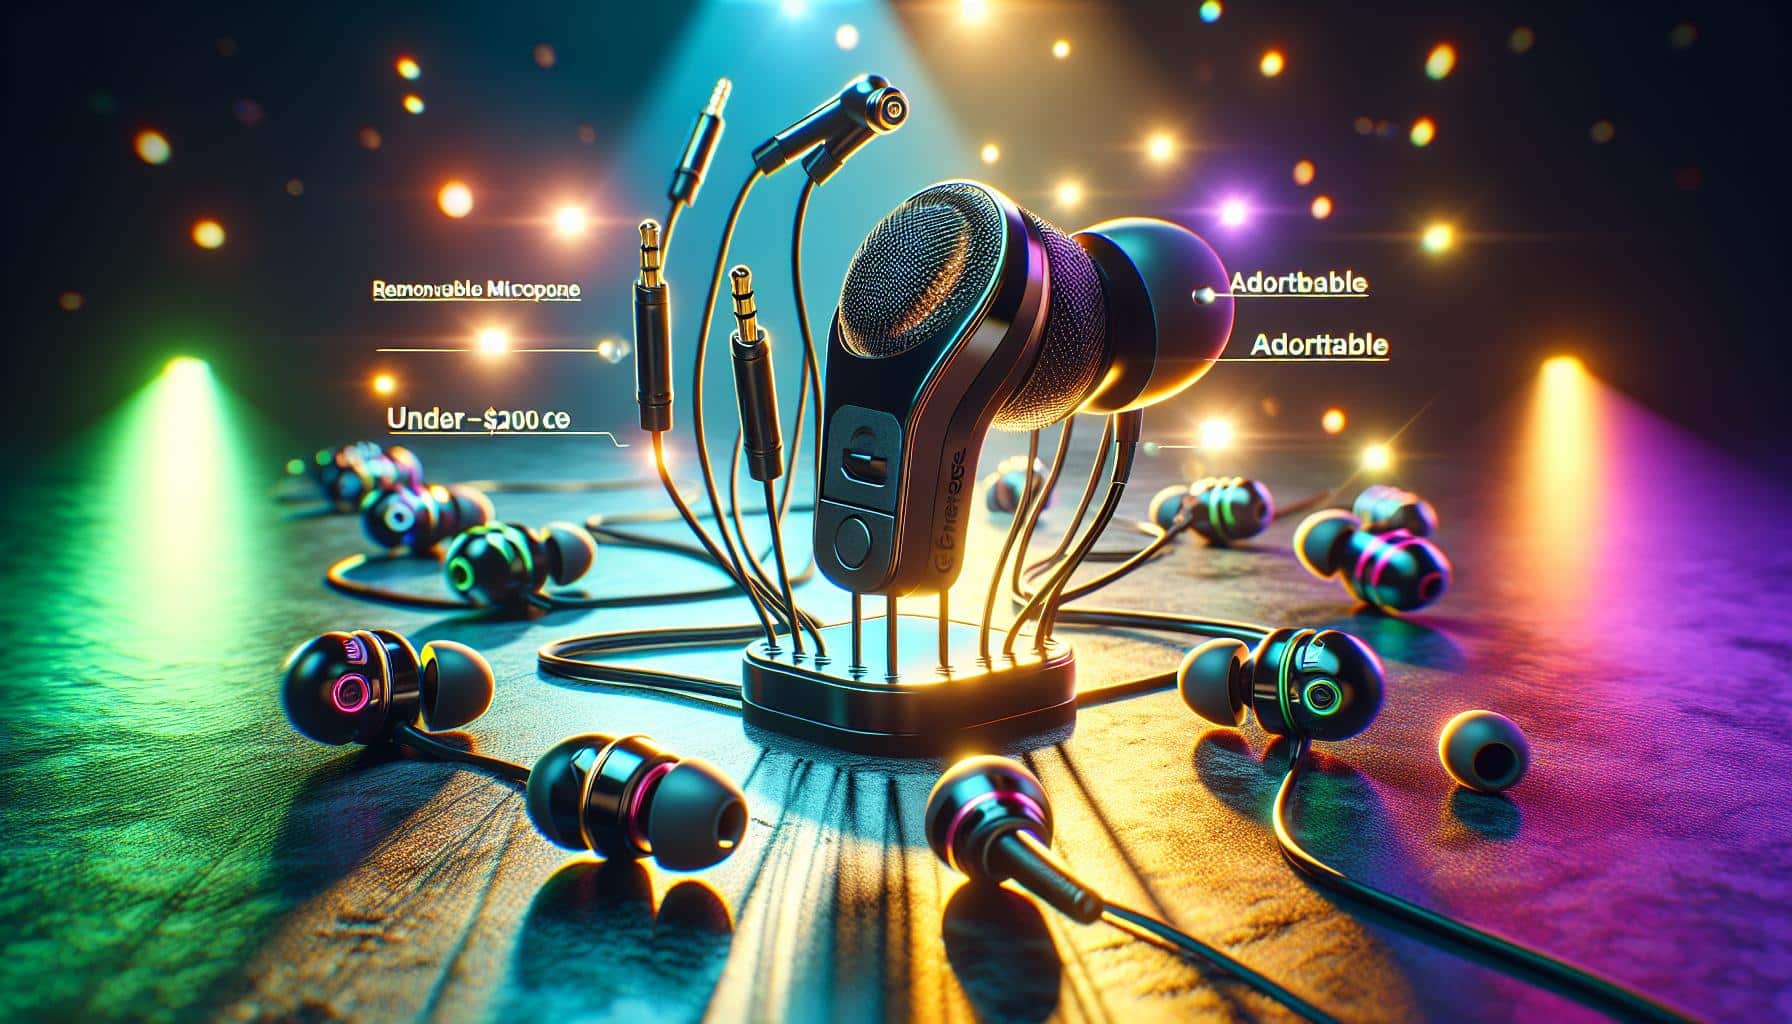 The Top Budget Gaming Earbuds Under : Perfect for Gaming on the Go | FinOracle